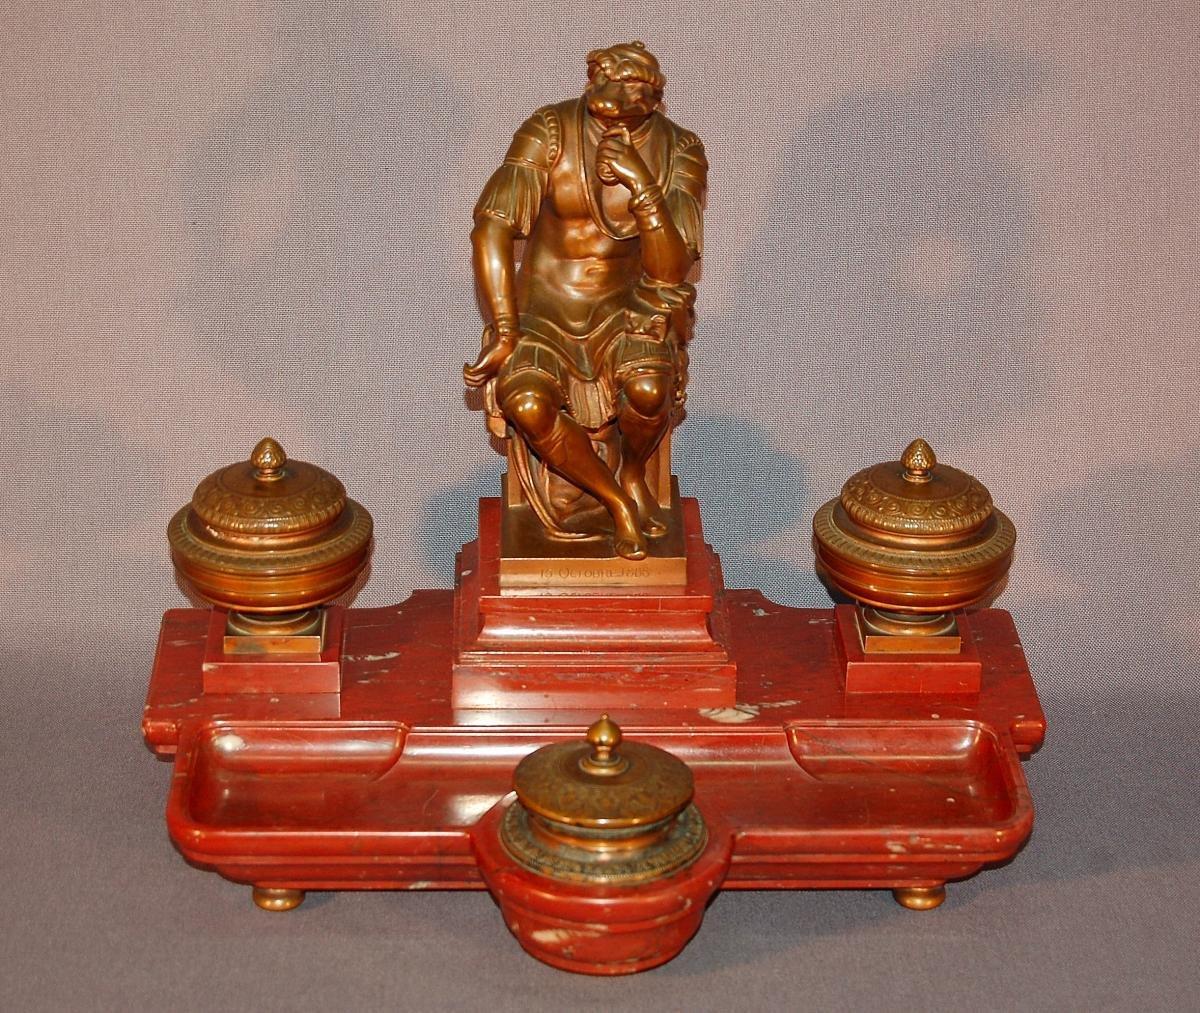 After Michelangelo Laurent de' Medici, spectacular red marble inkwell surmounted by a sculpture and three bronze cups with brown patina. Signed F Barbedienne founder, Collas Paris mechanical reduction stamp. Dated 1880. Perfect condition.